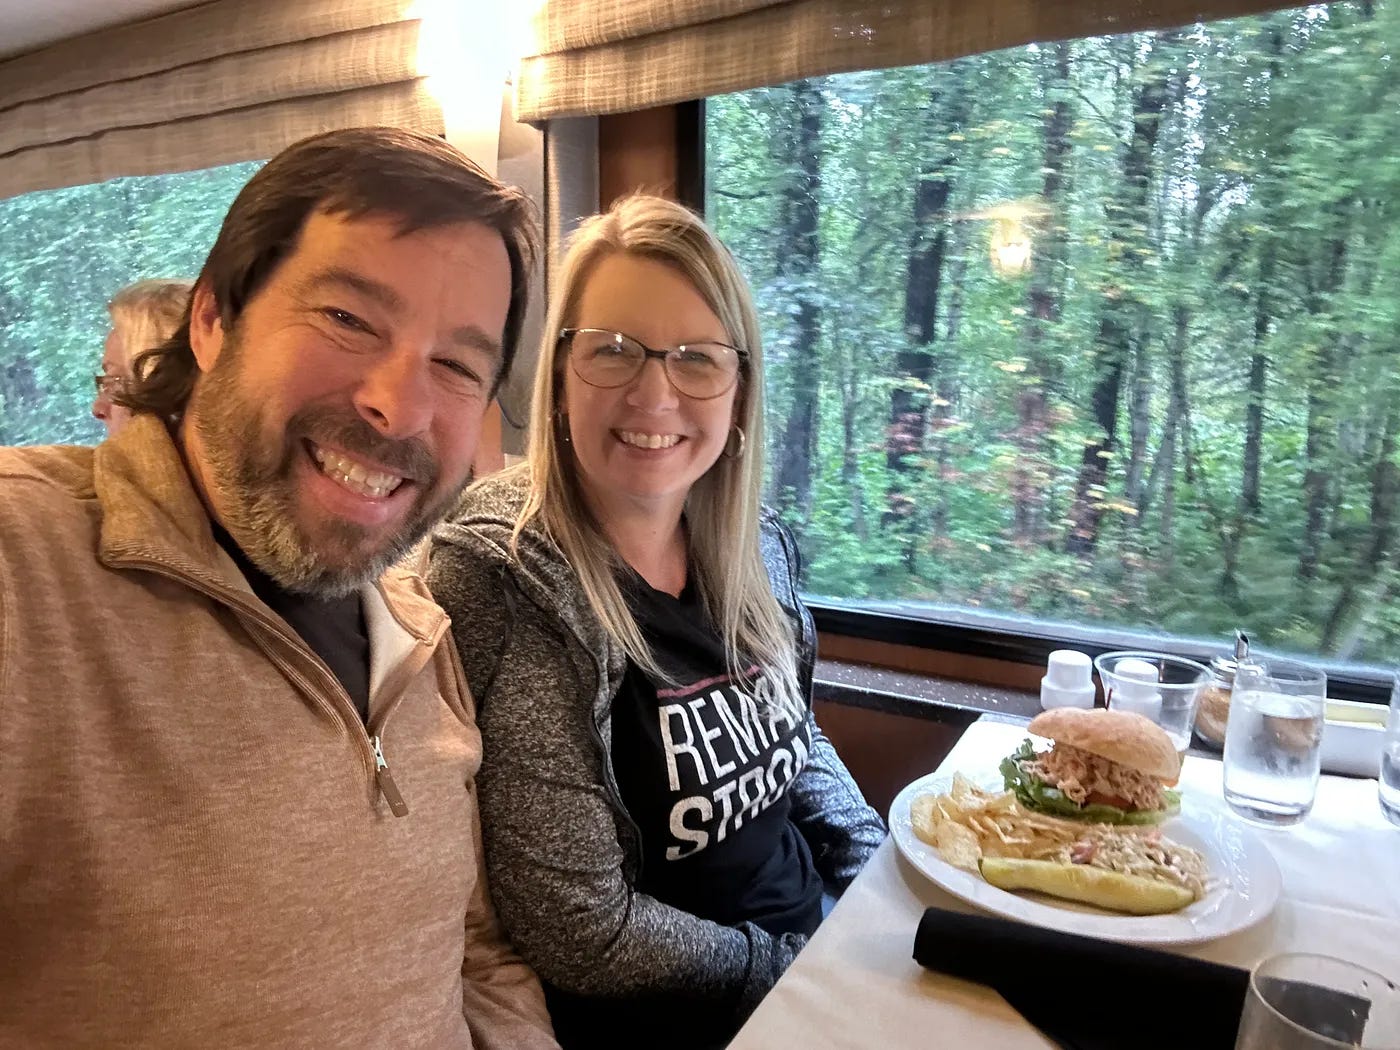 Enjoying lunch downstairs in the dining car